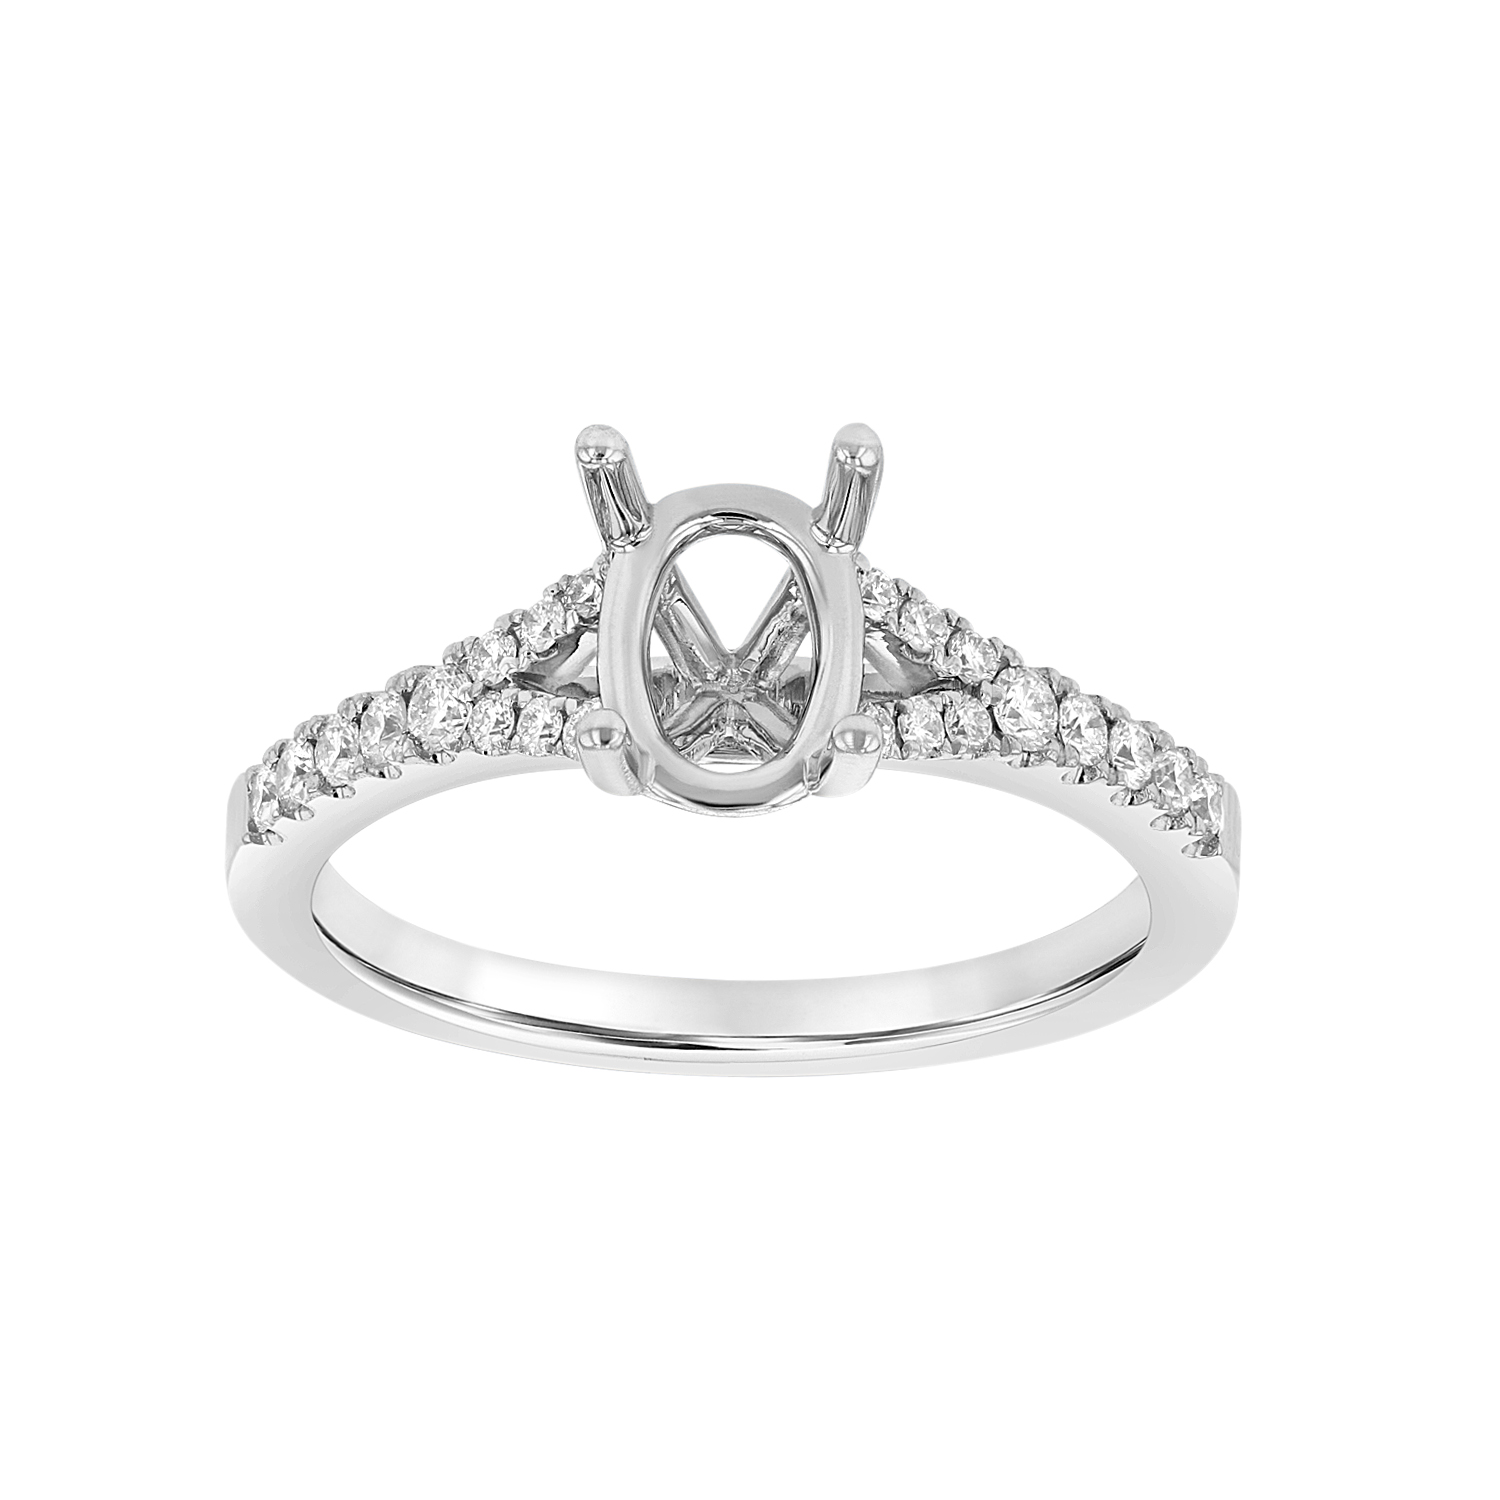 View 0.28ctw Diamond Semi Mount Engagement Ring in 18k White Gold